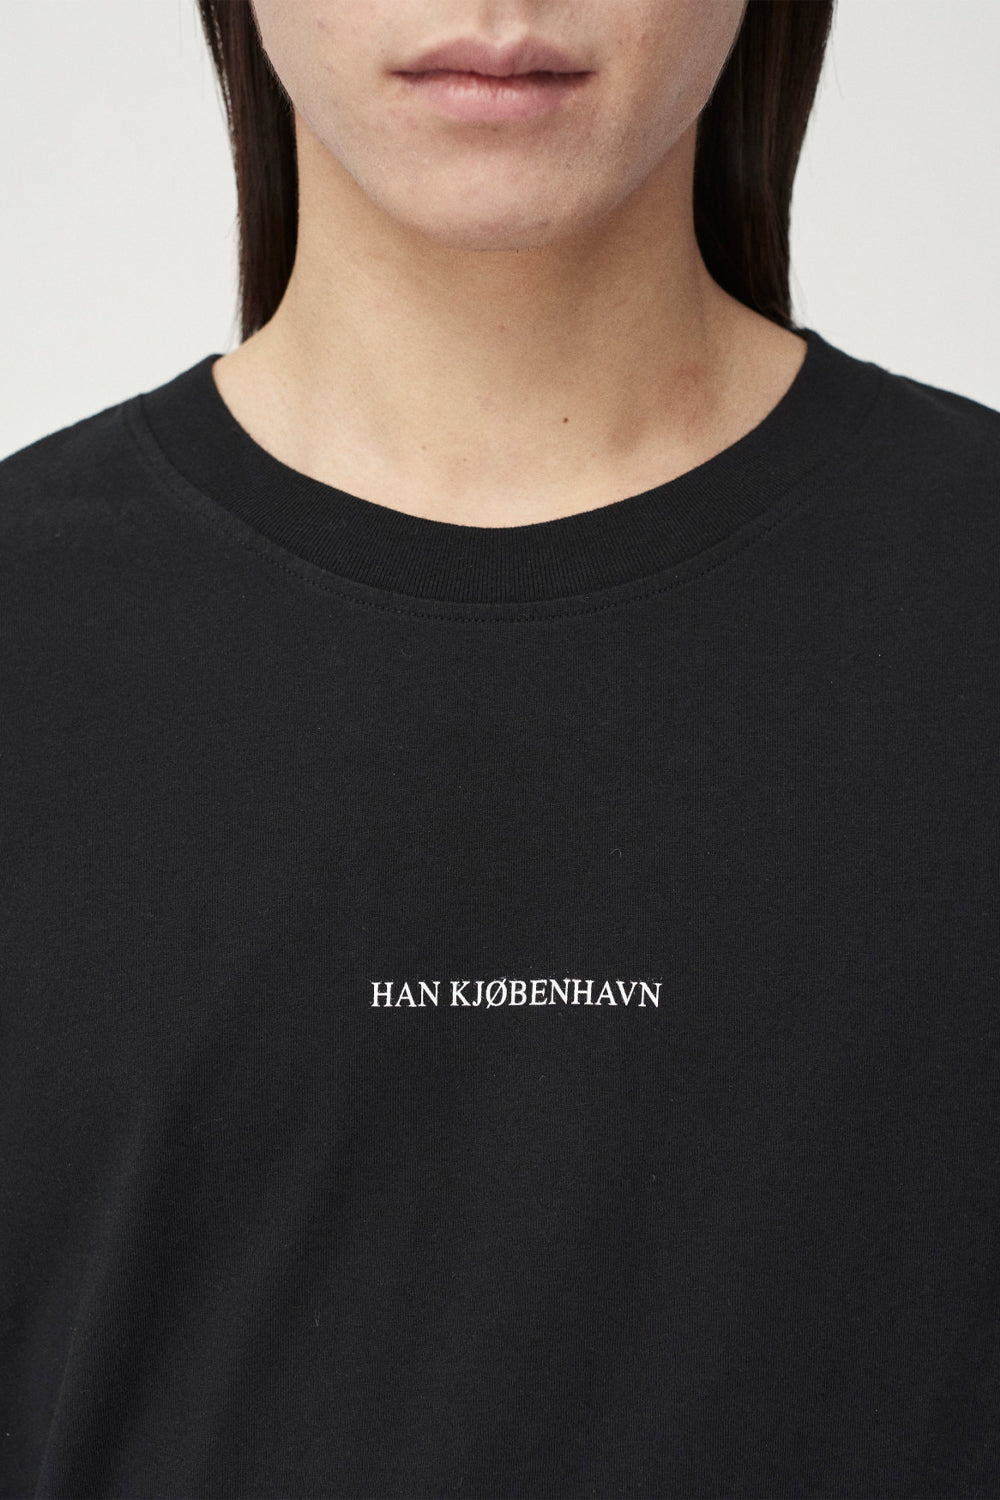 Buy the Han Kjobenhavn Supper Boxy T-Shirt in Black at Intro. Spend £50 for free UK delivery. Official stockists. We ship worldwide.